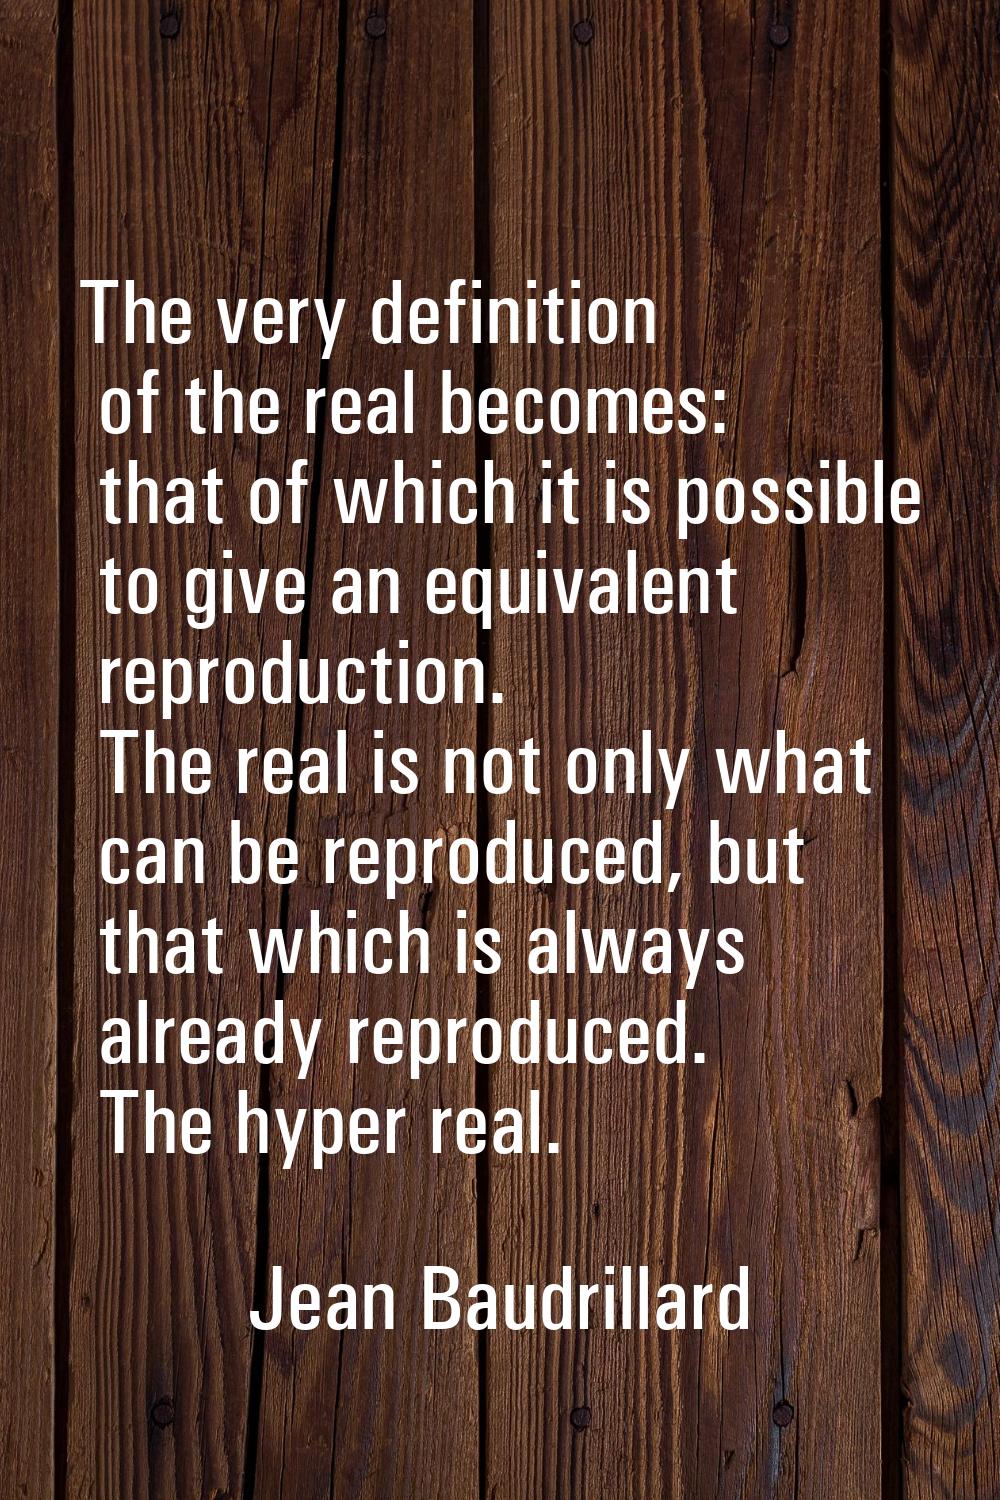 The very definition of the real becomes: that of which it is possible to give an equivalent reprodu